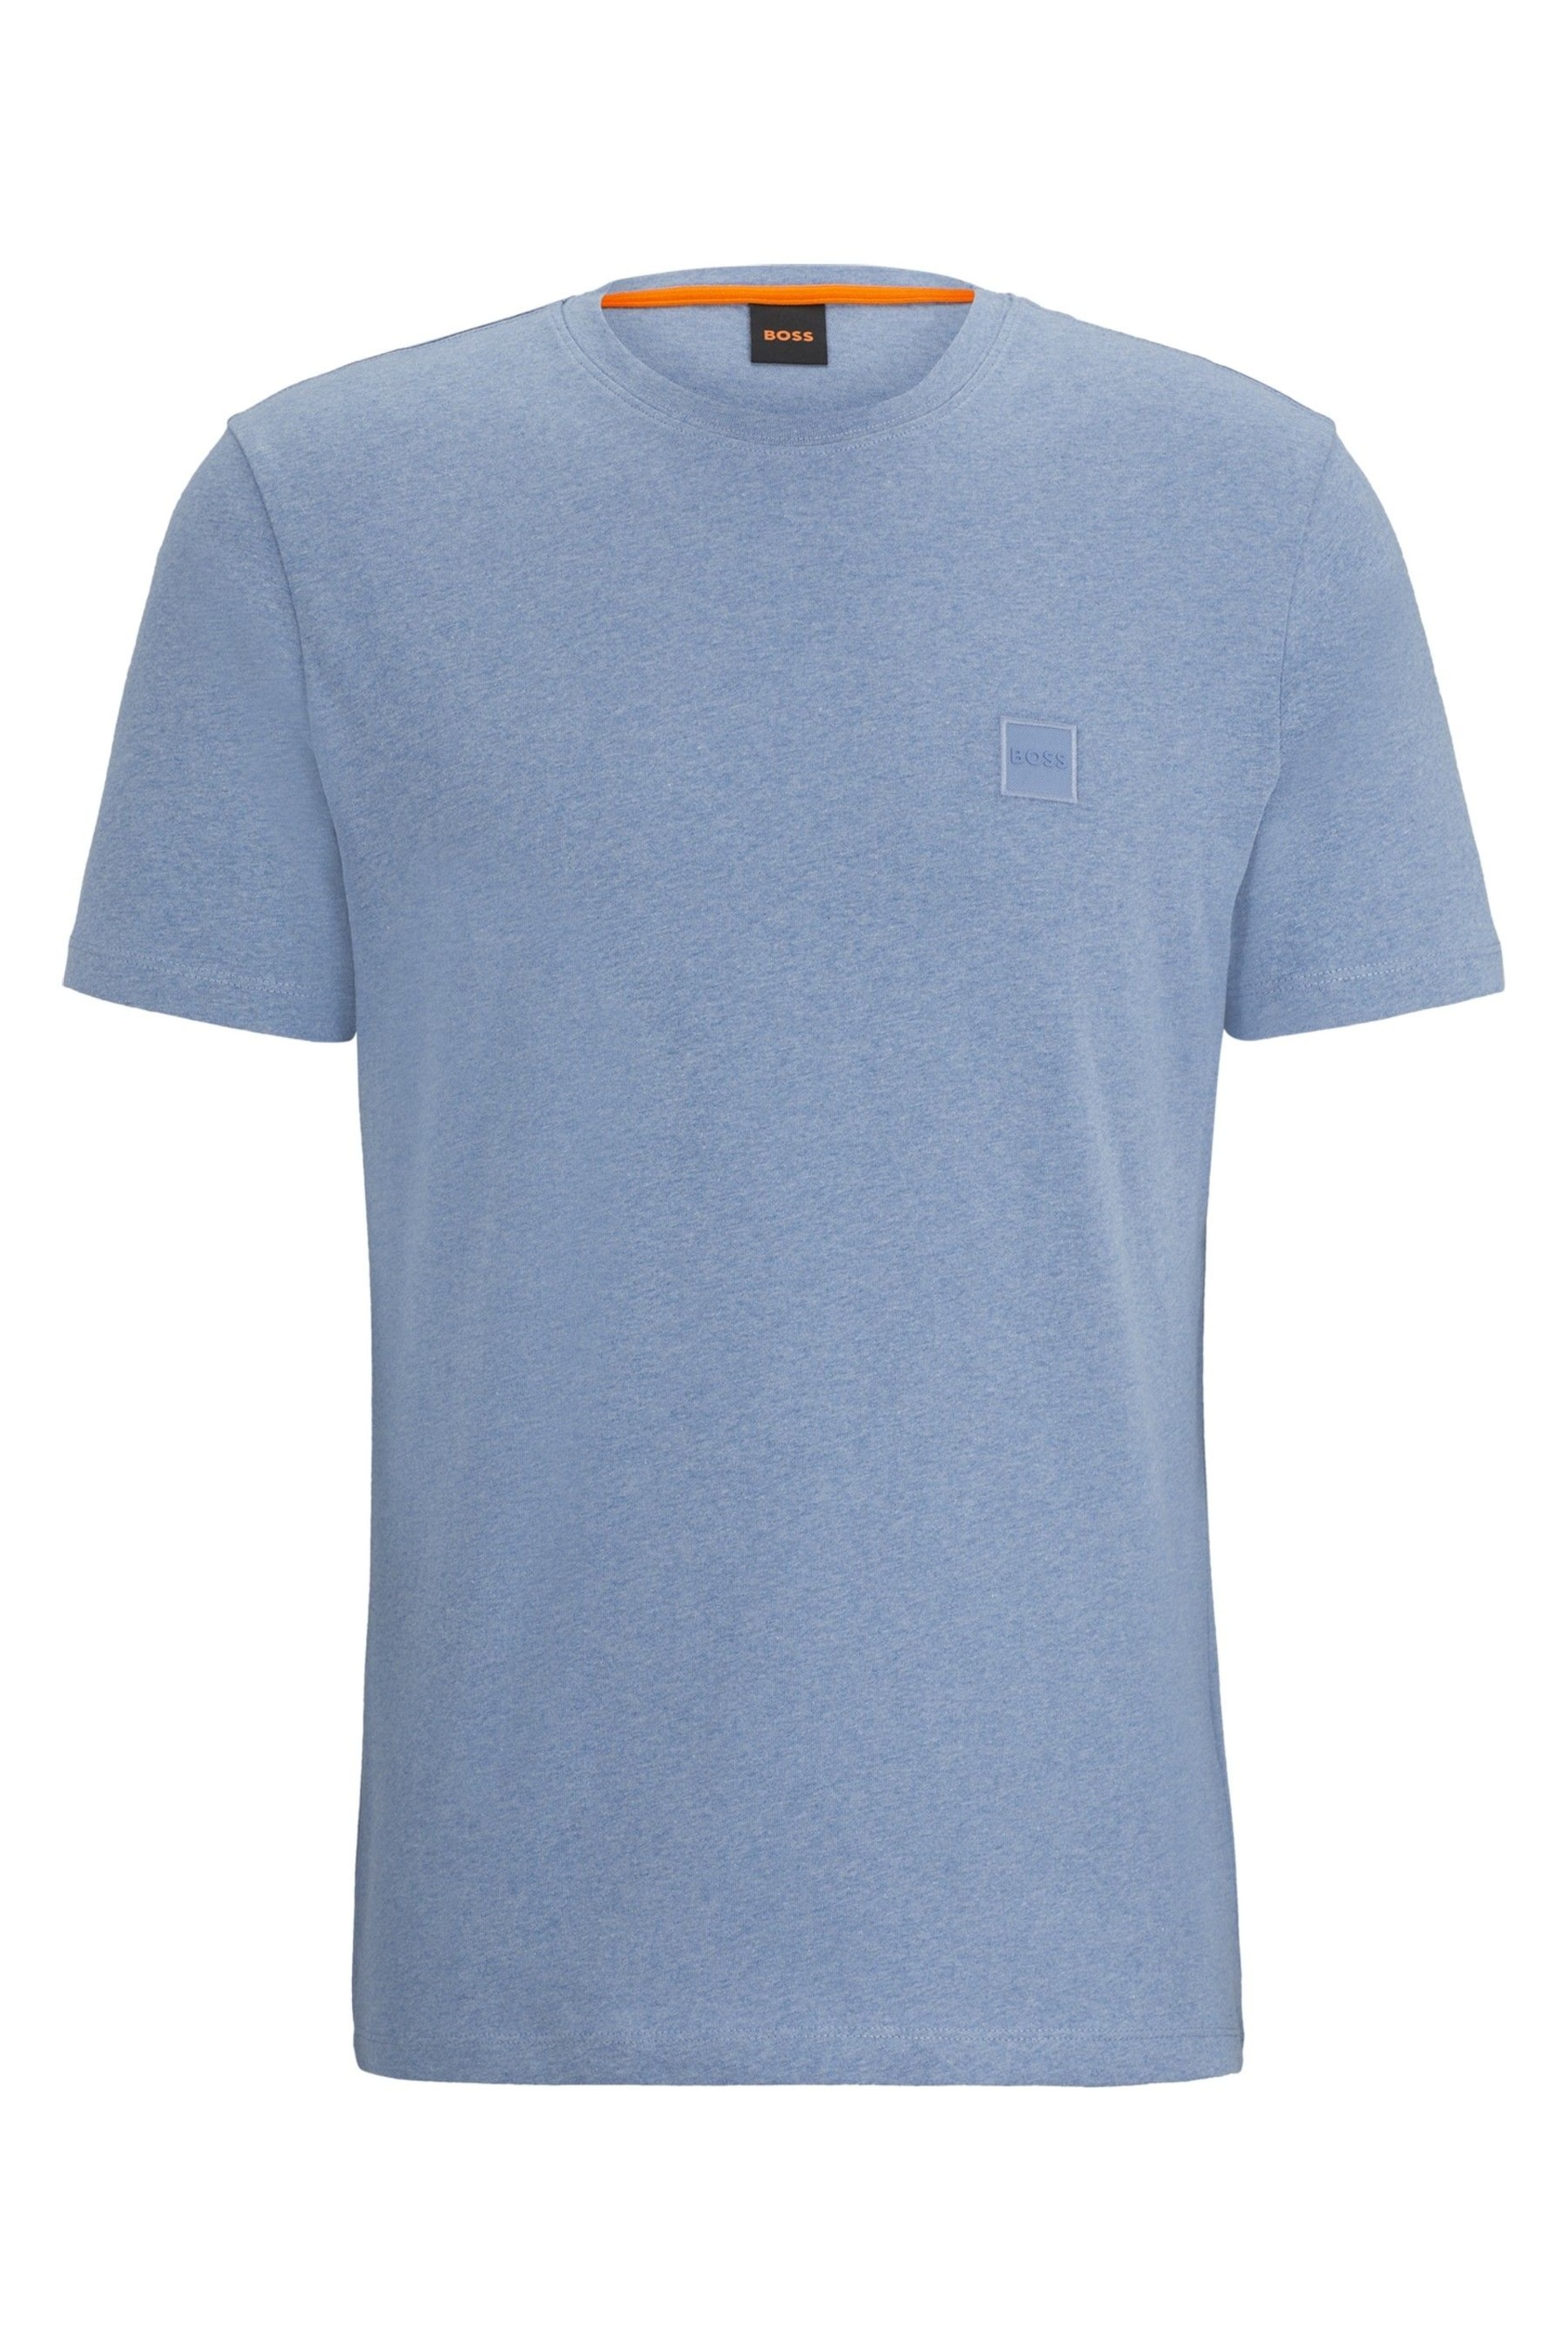 BOSS Blue Relaxed Fit Box Logo T-Shirt - Image 5 of 5